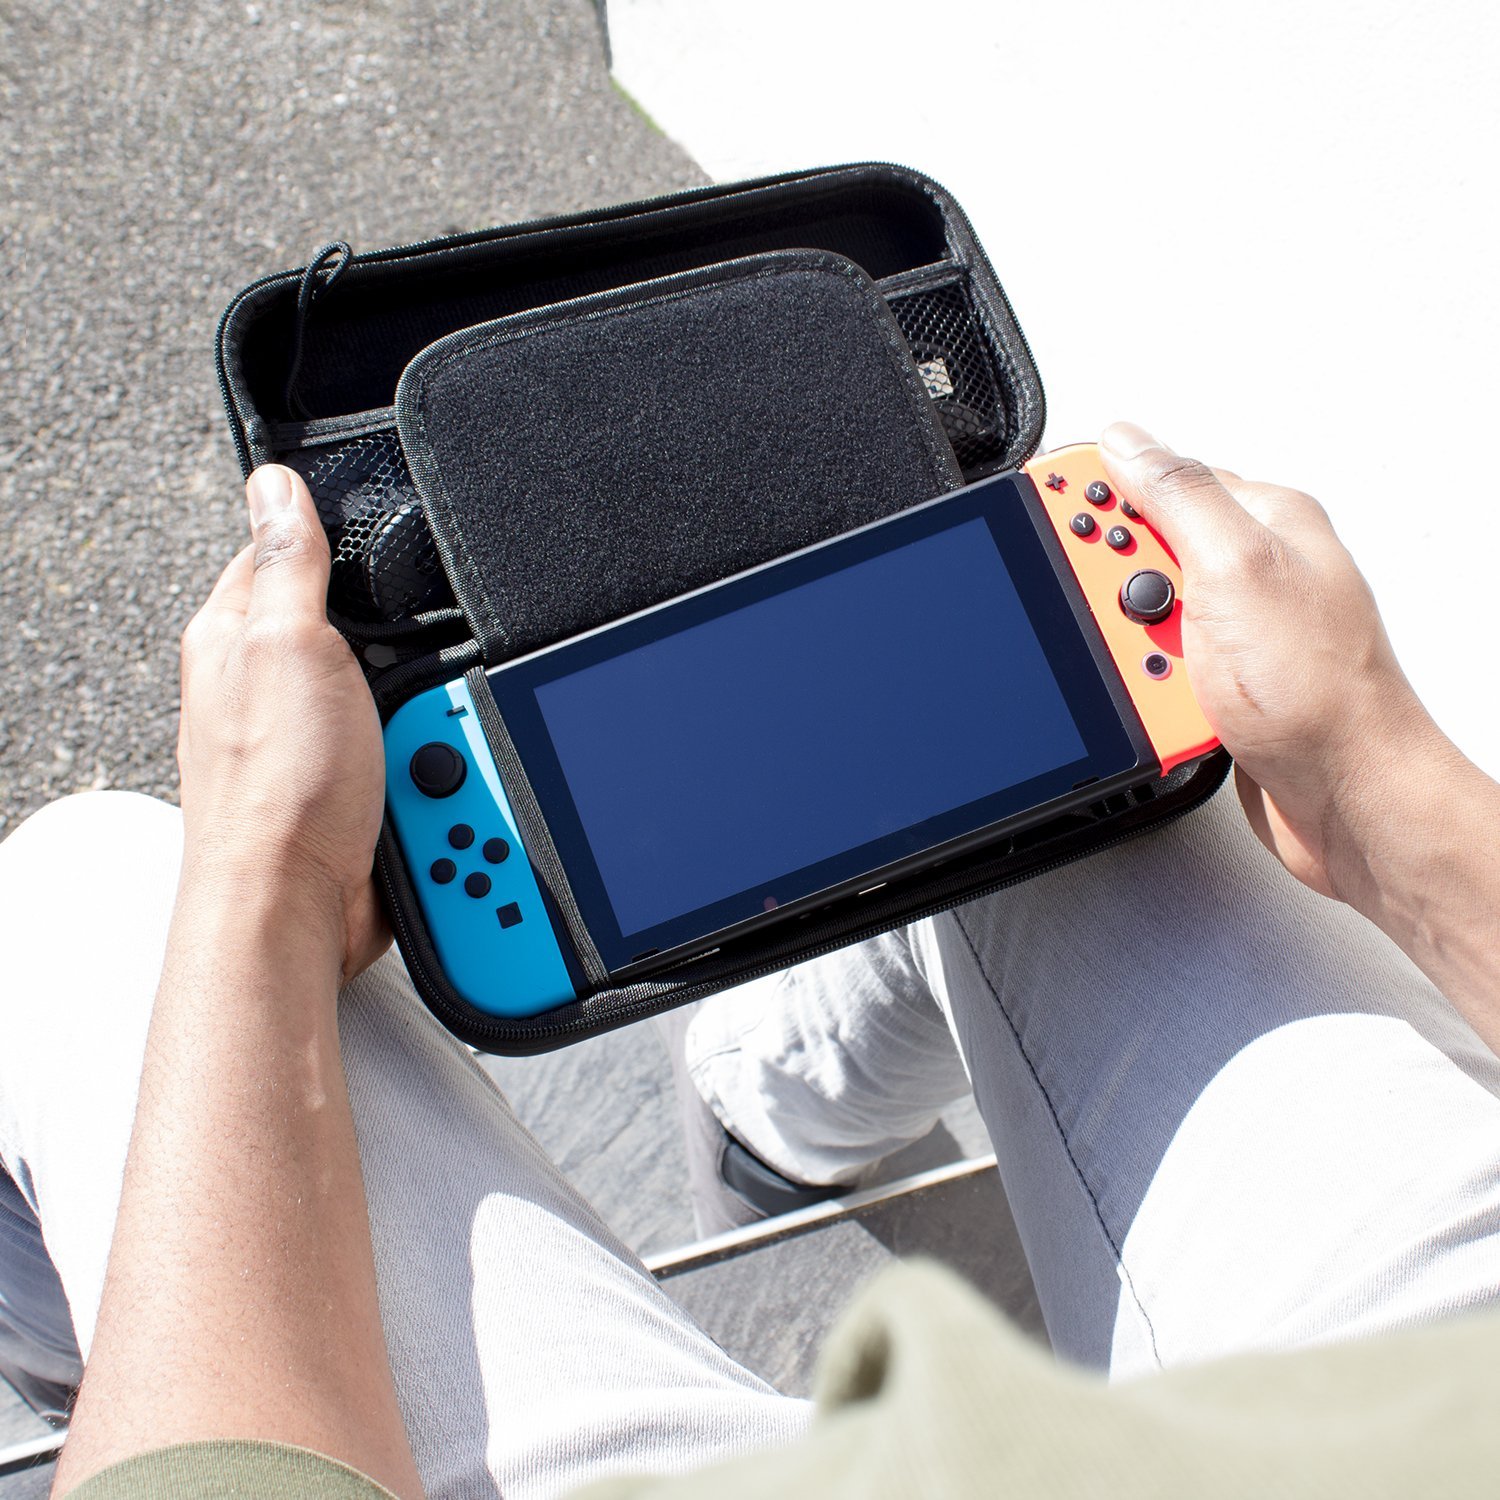 Orzly Carry Case Nintendo Switch